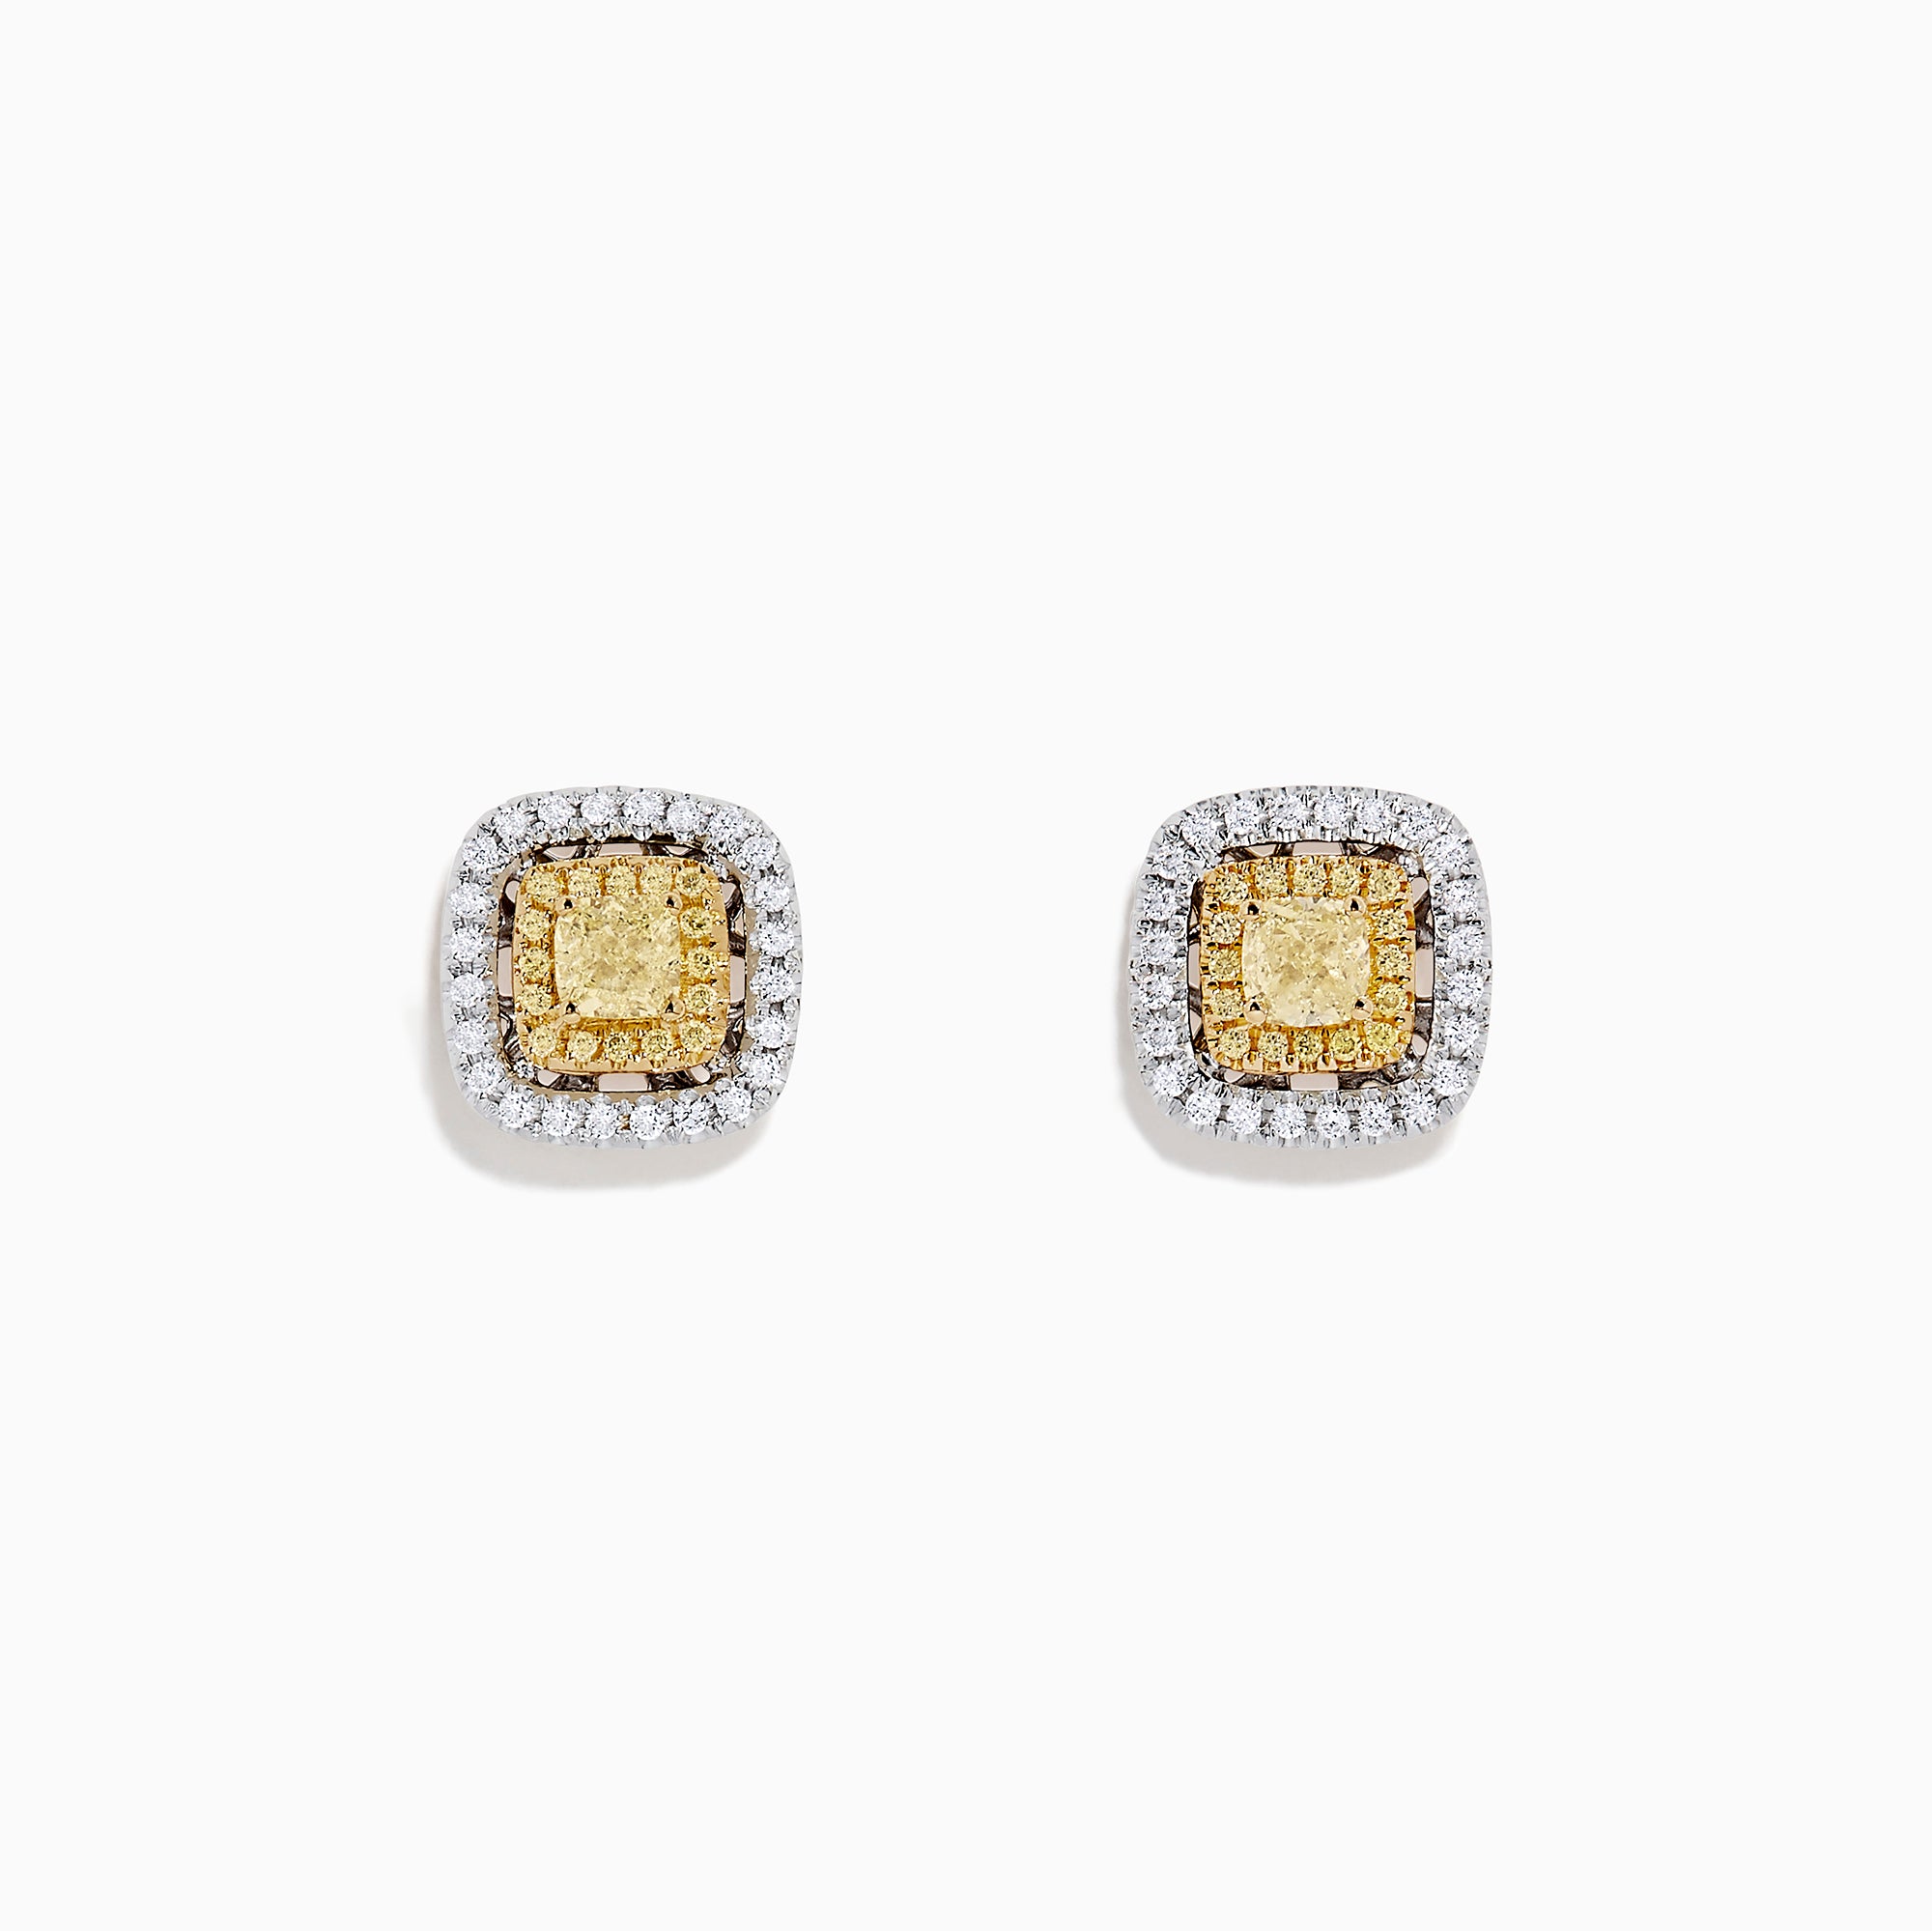 Effy Canare 18K Two Tone Gold Yellow and White Diamond Earrings, 0.76 TCW